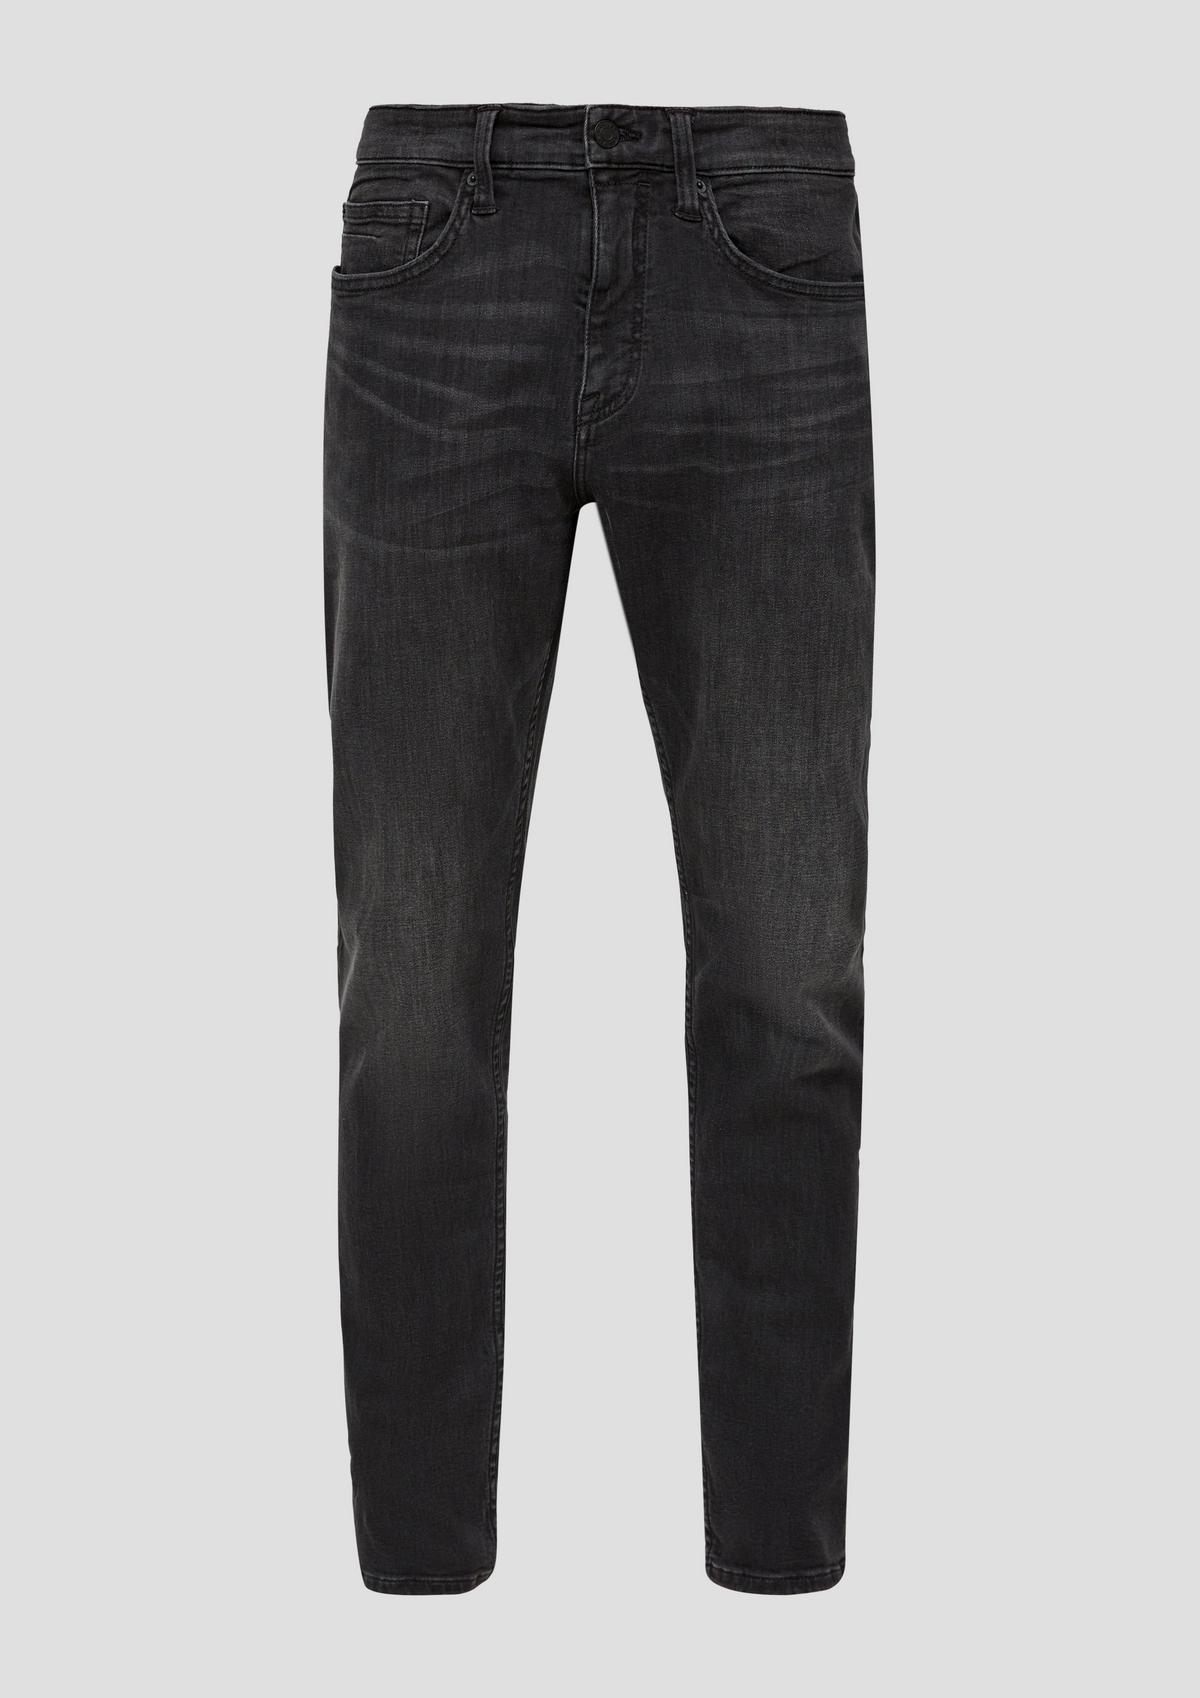 s.Oliver Mauro Jeans / Regular Fit / High Rise / Tapered Leg / Garment Wash